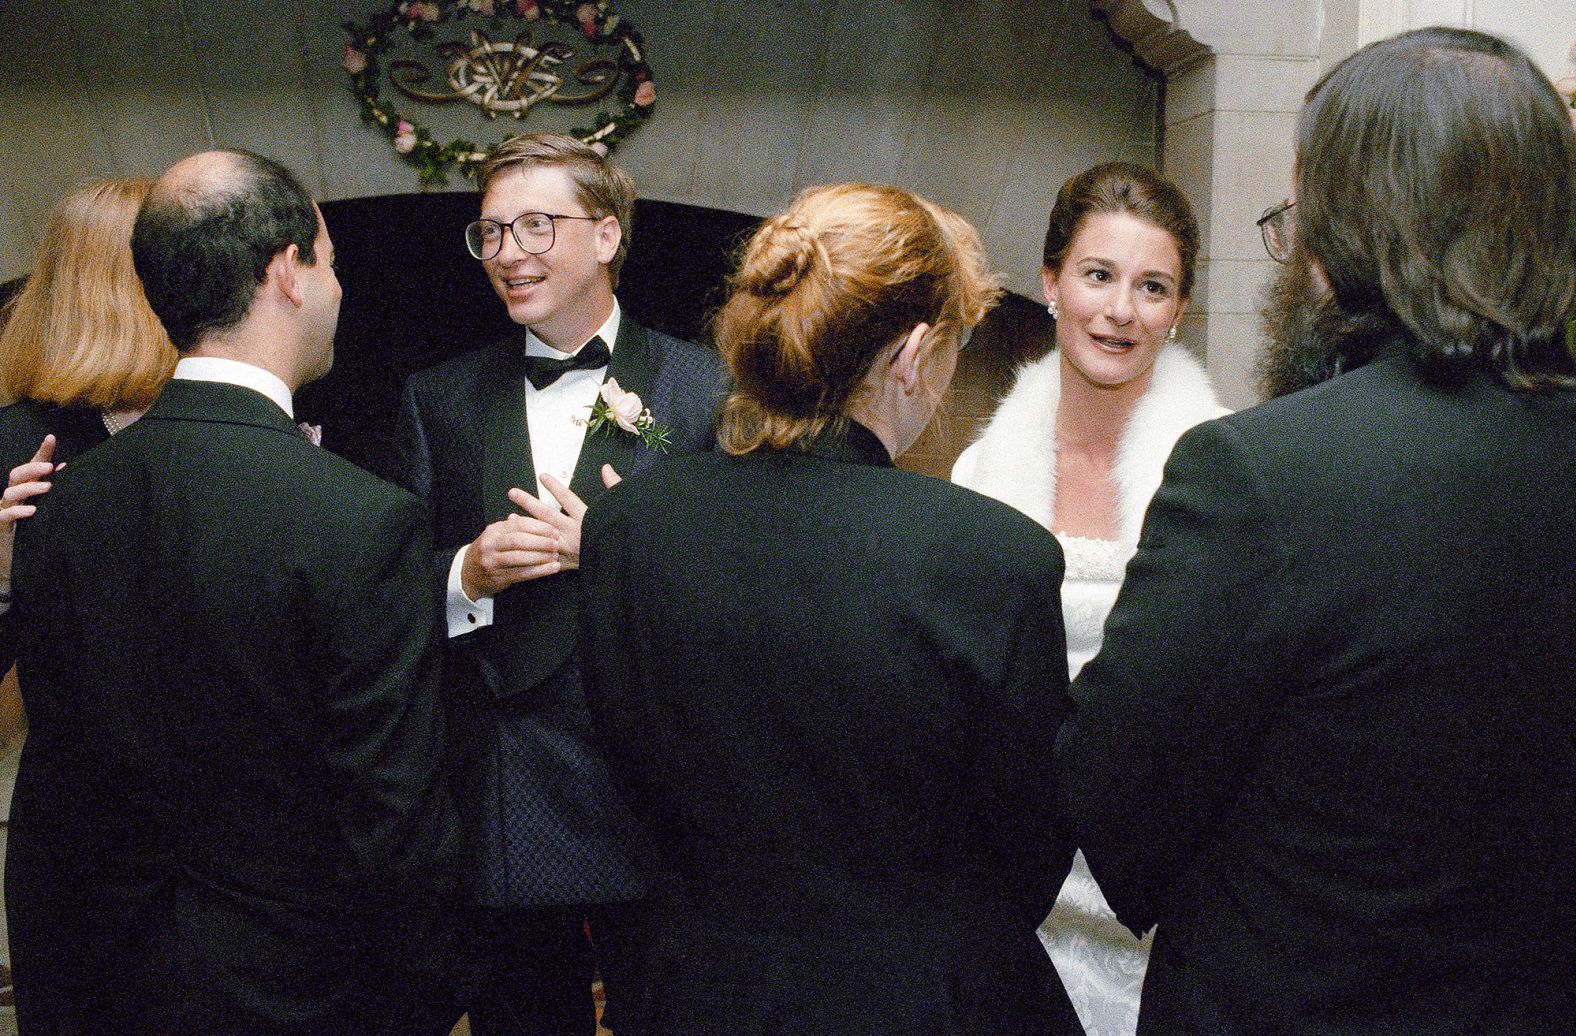 Gates and his wife, Melinda, greet guests during a reception in Seattle in 1994. It was a week after they were married in Hawaii. The two met at Microsoft. She started as a product manager as the only woman in the first class of MBA graduates to join the company. She eventually rose through the ranks to become general manager of information products.